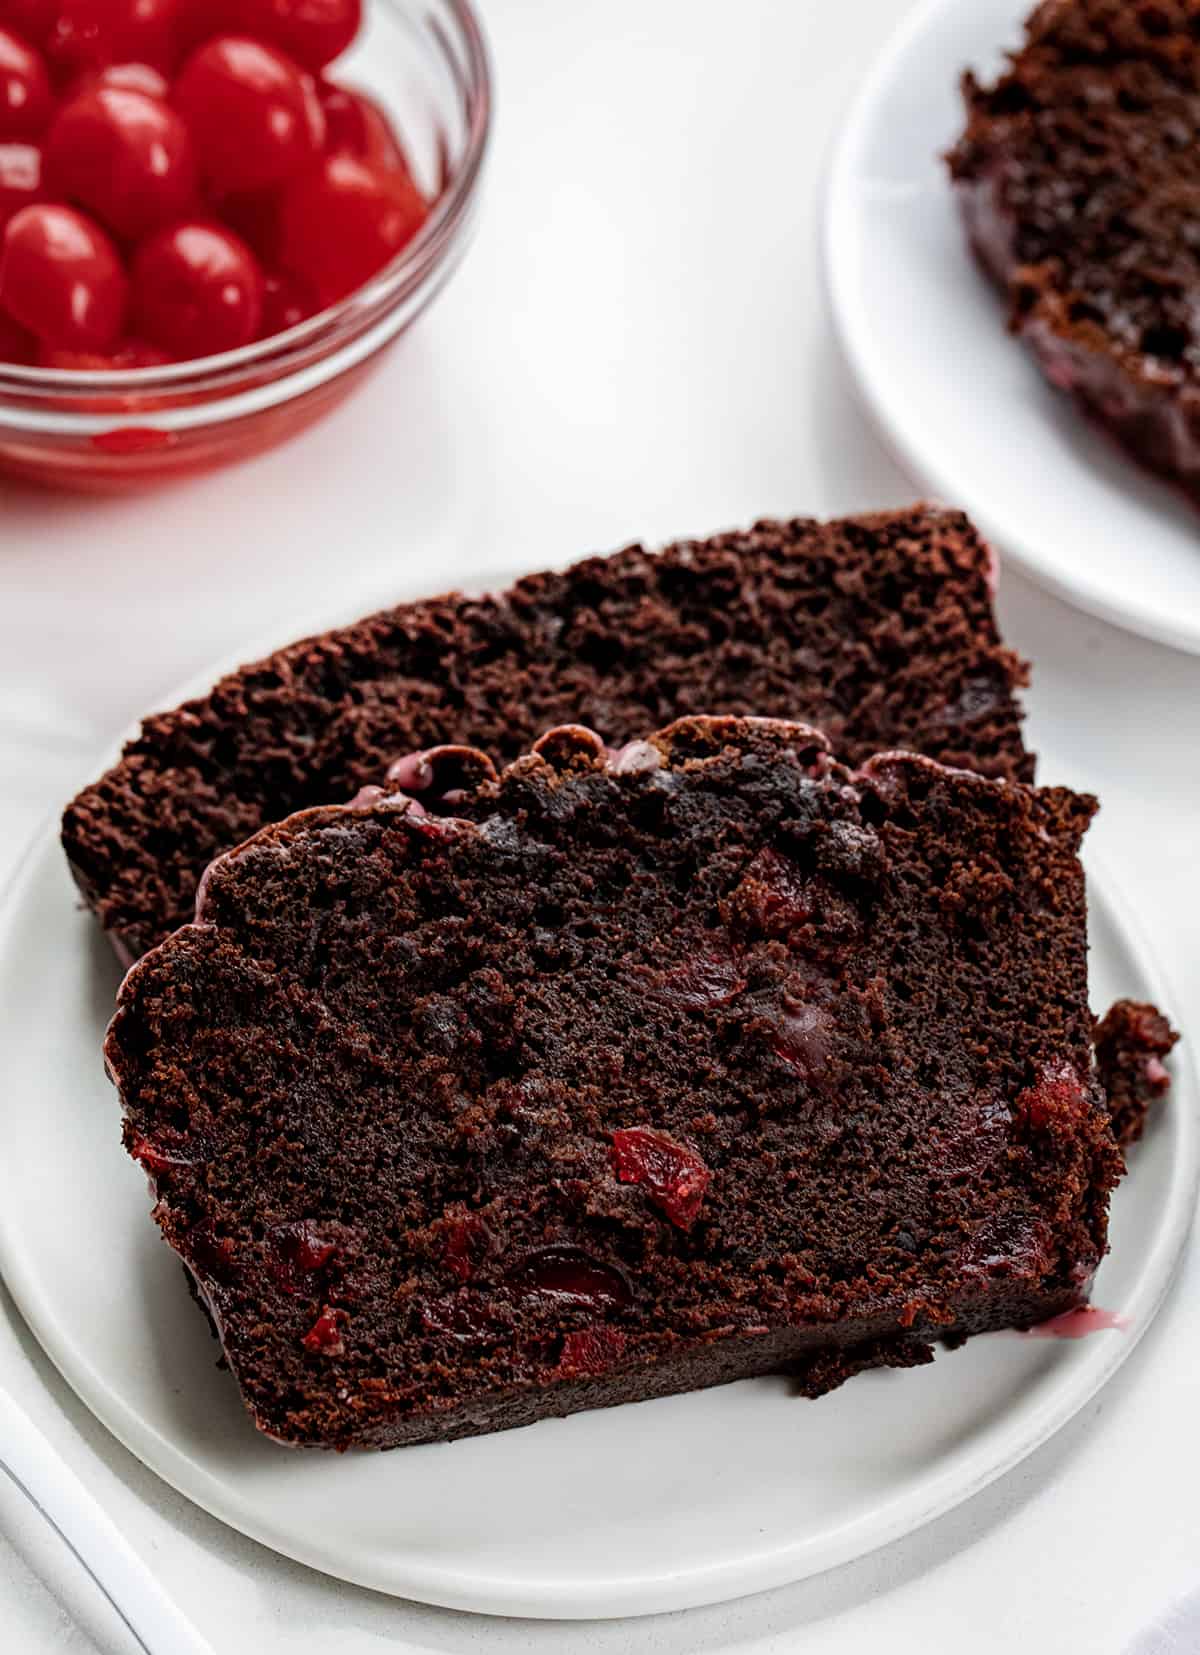 Close up of Cherry Brownie Bread Slices on a Plate with Cherries in the Background.